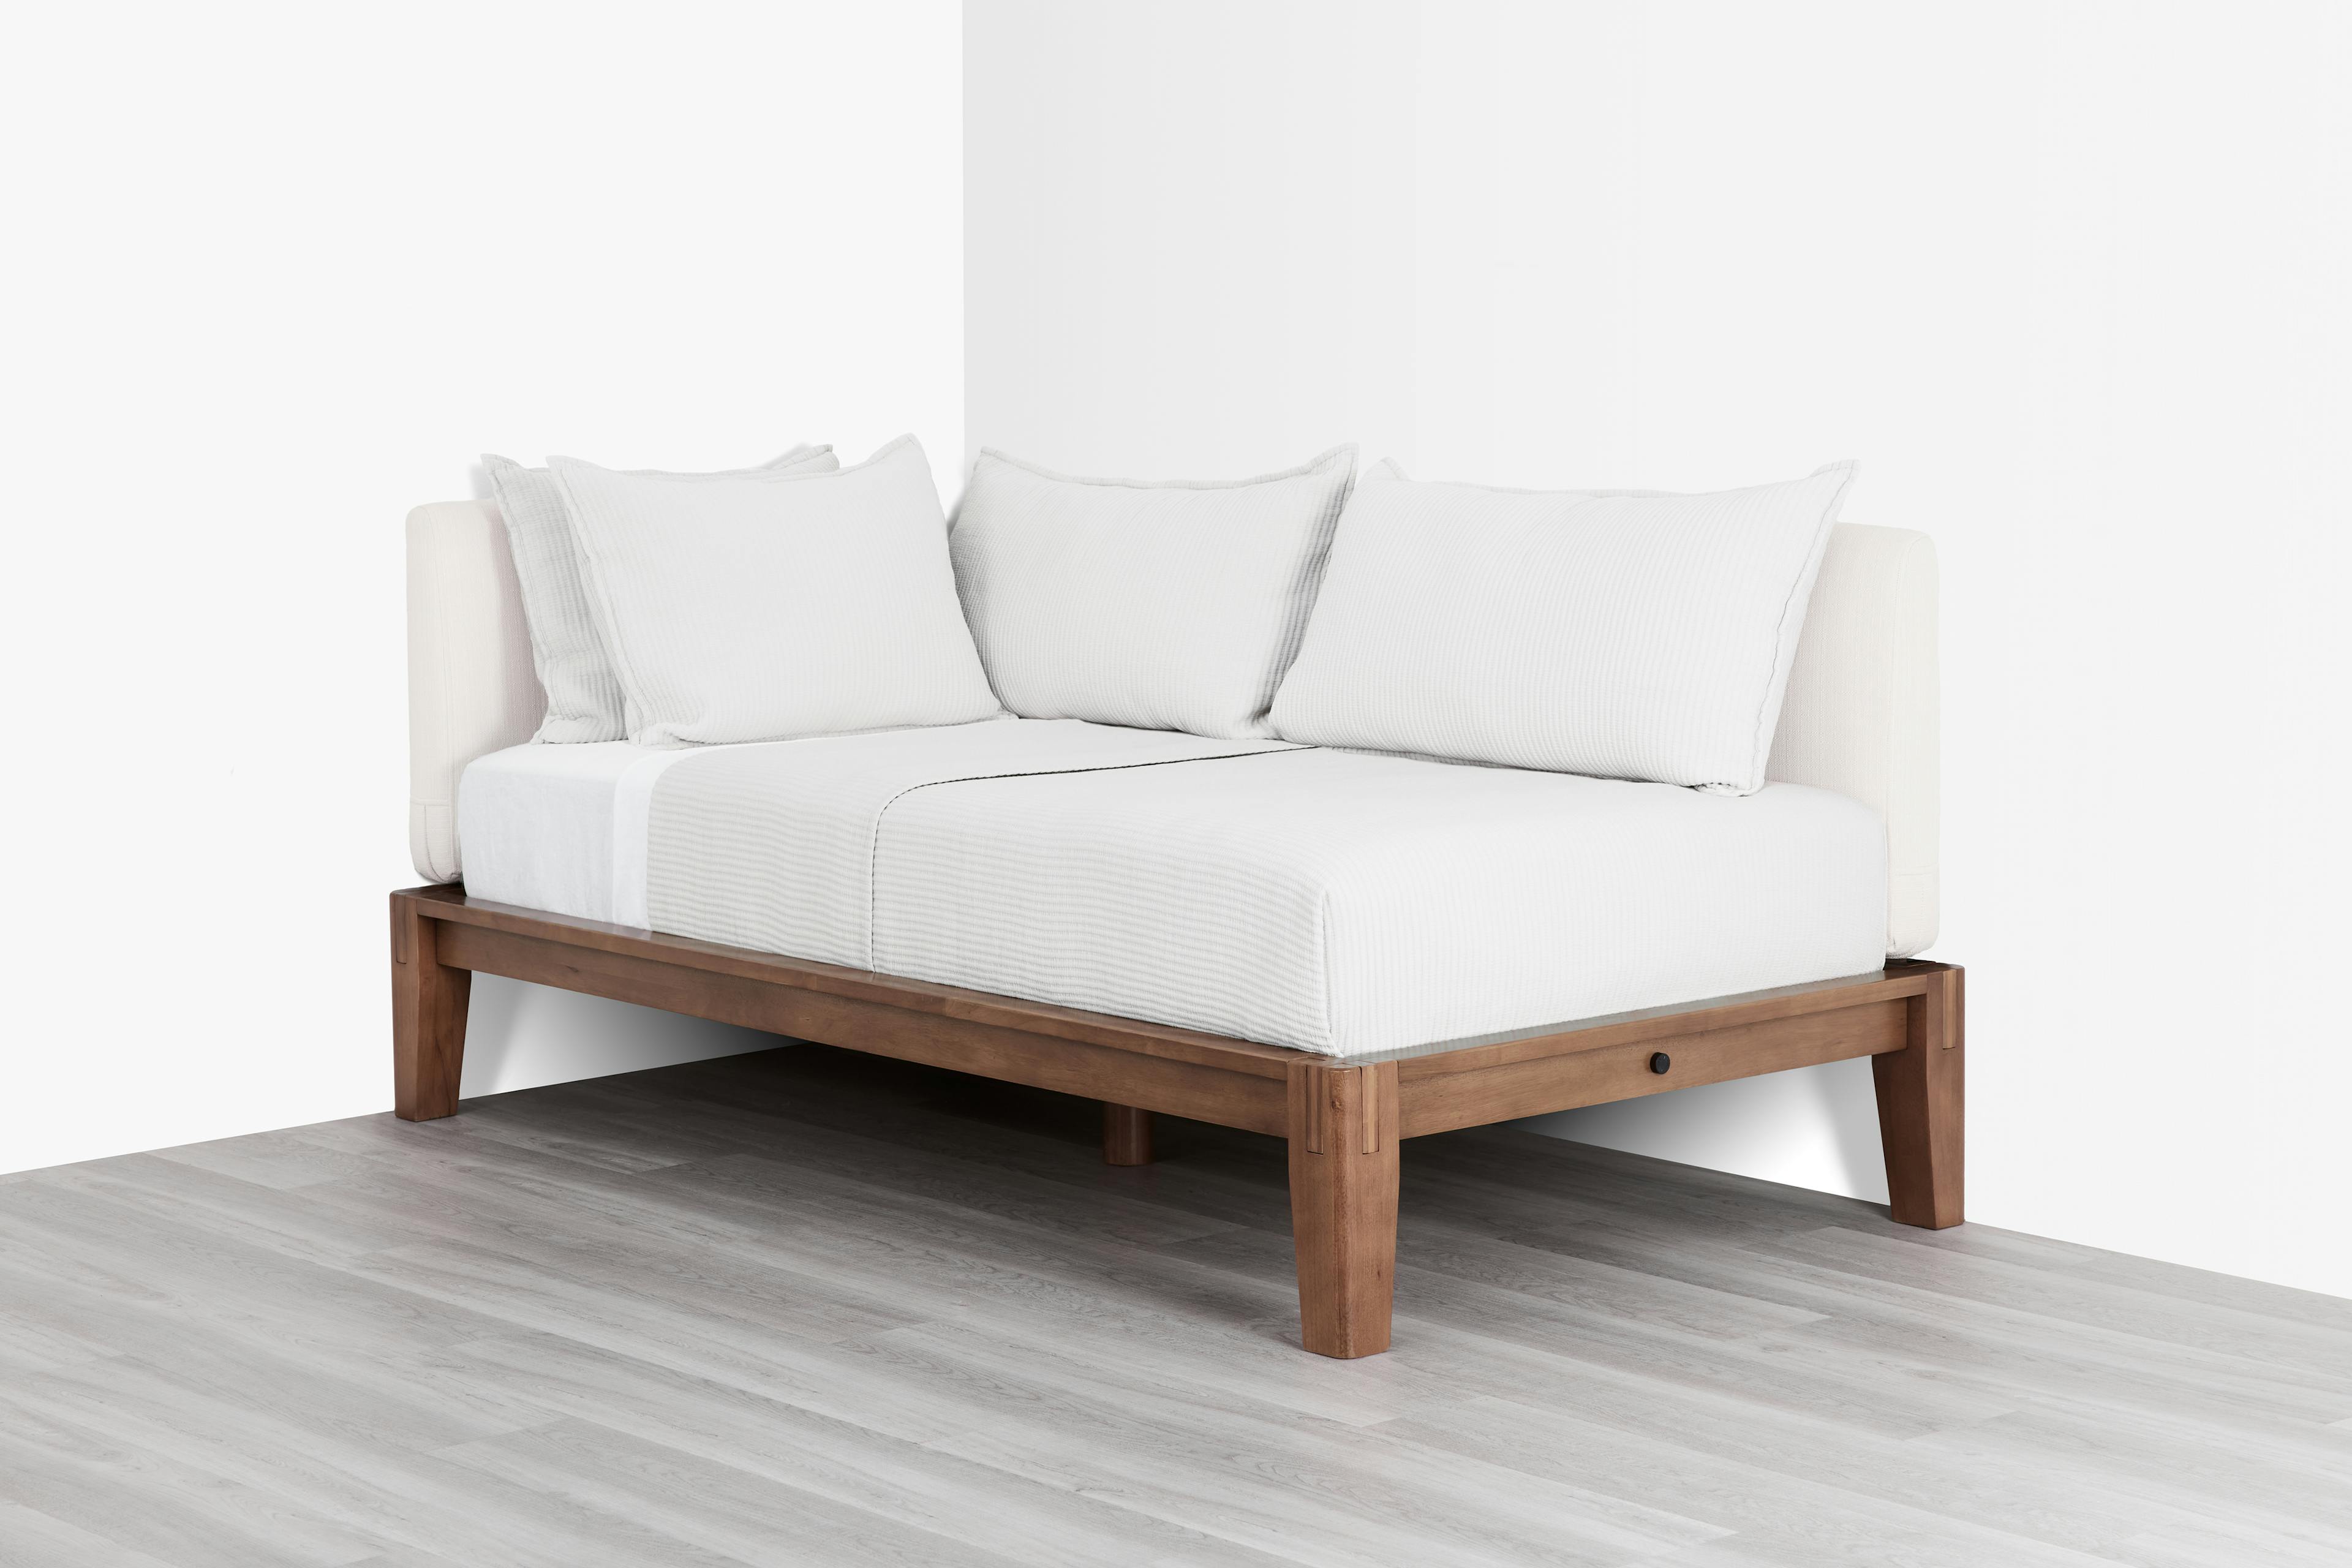 PDP Image: The Daybed (Walnut / Light Linen) - 3:2 - Pillow